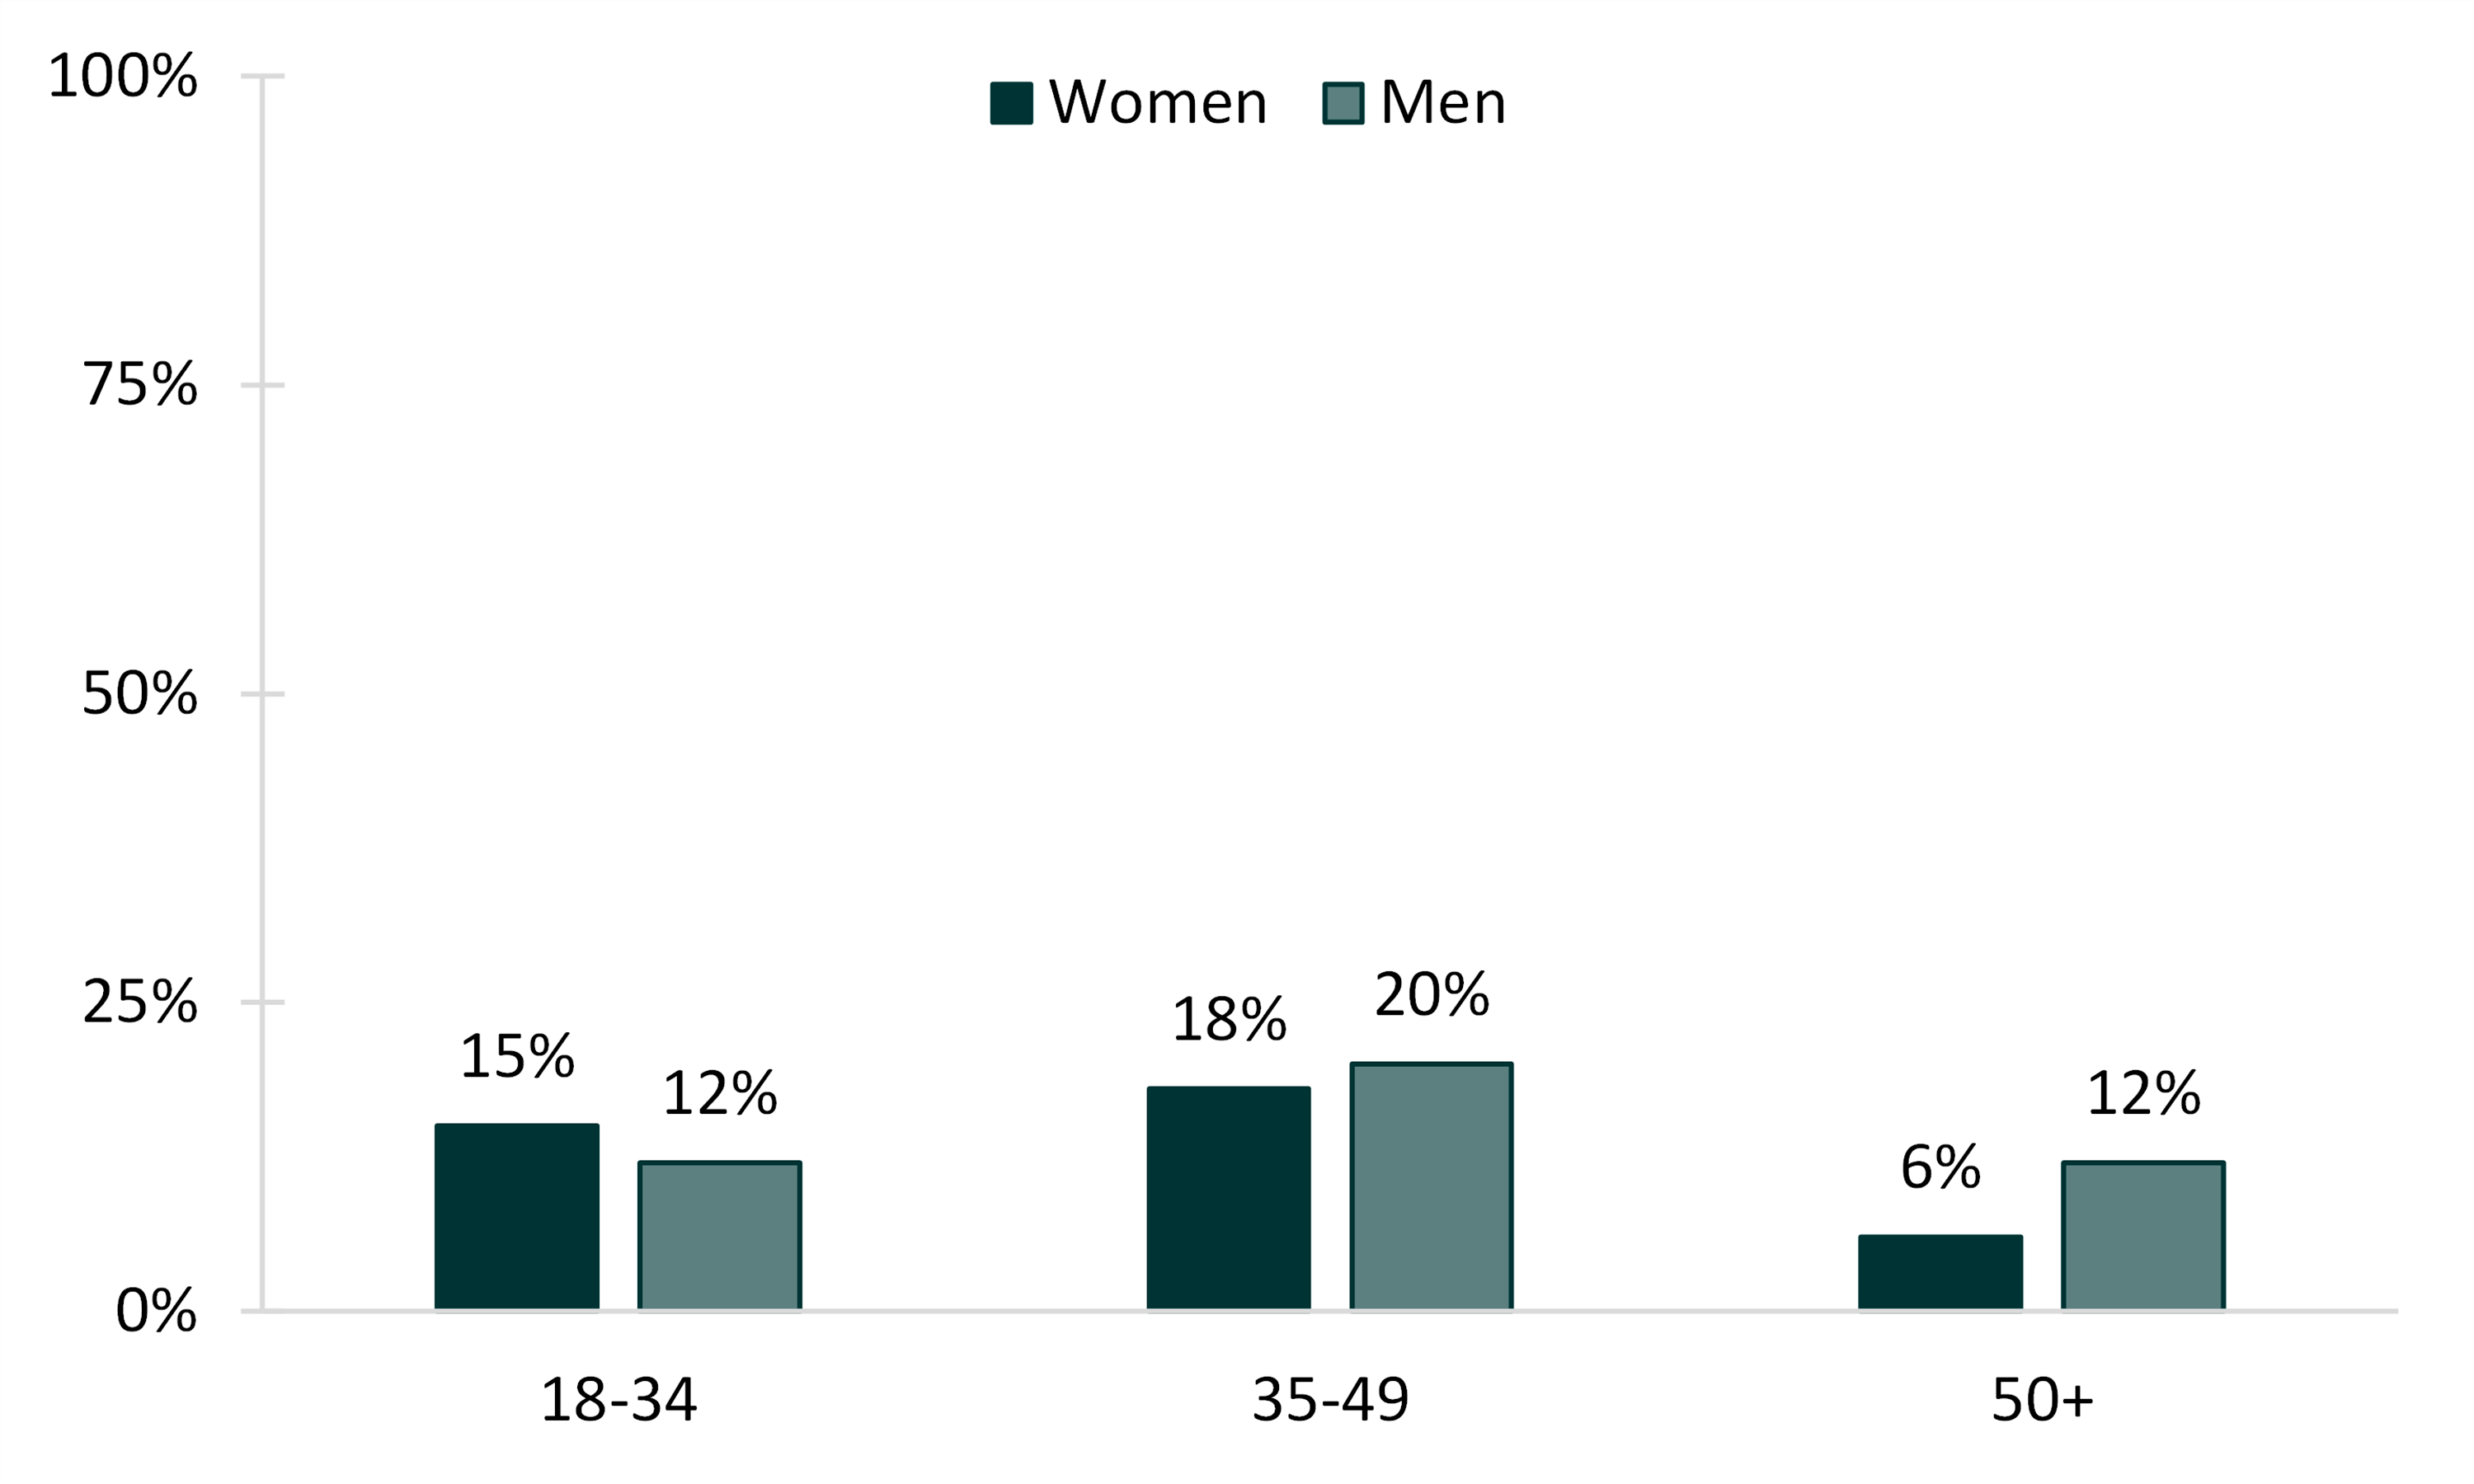 teal bar chart showing share of unmarried individuals cohabiting, by gender and age group